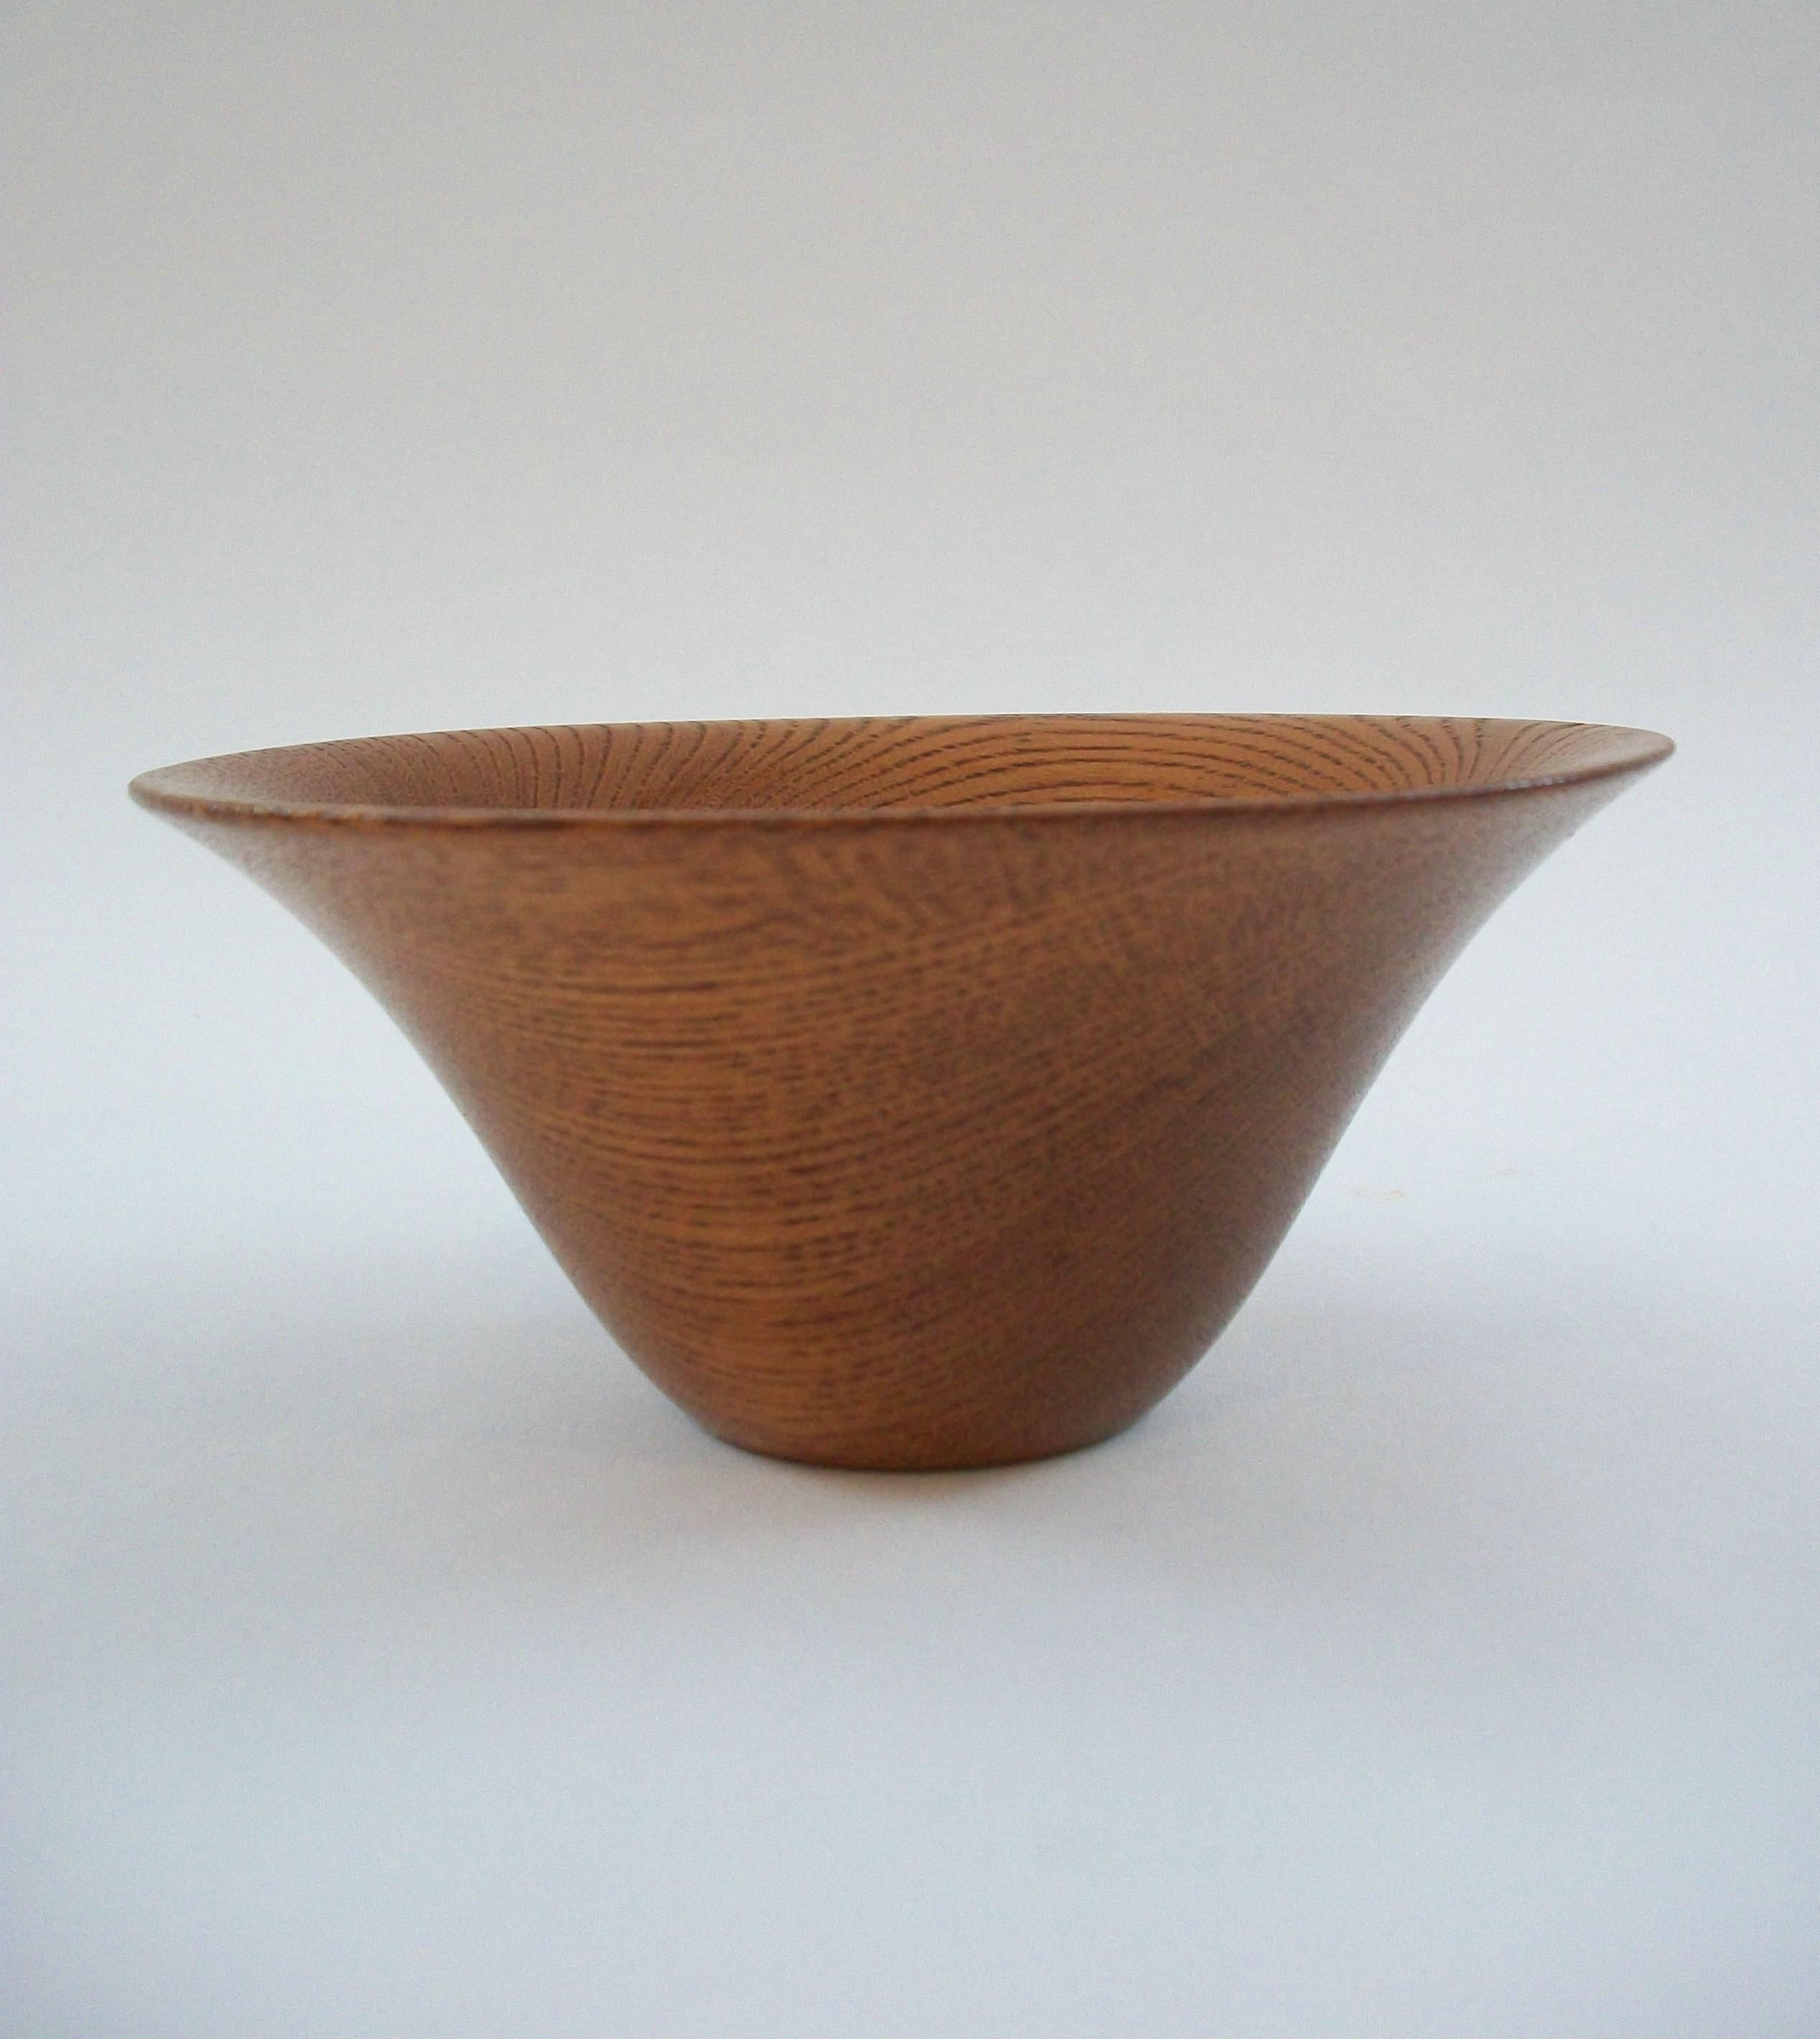 Mid Century Danish teak conical bowl - small size - featuring an elegant modern design - varnished finish - signed on the base (unidentified maker) - Denmark - circa 1960's.

Excellent vintage condition - minor scuffs - no loss - no damage - no